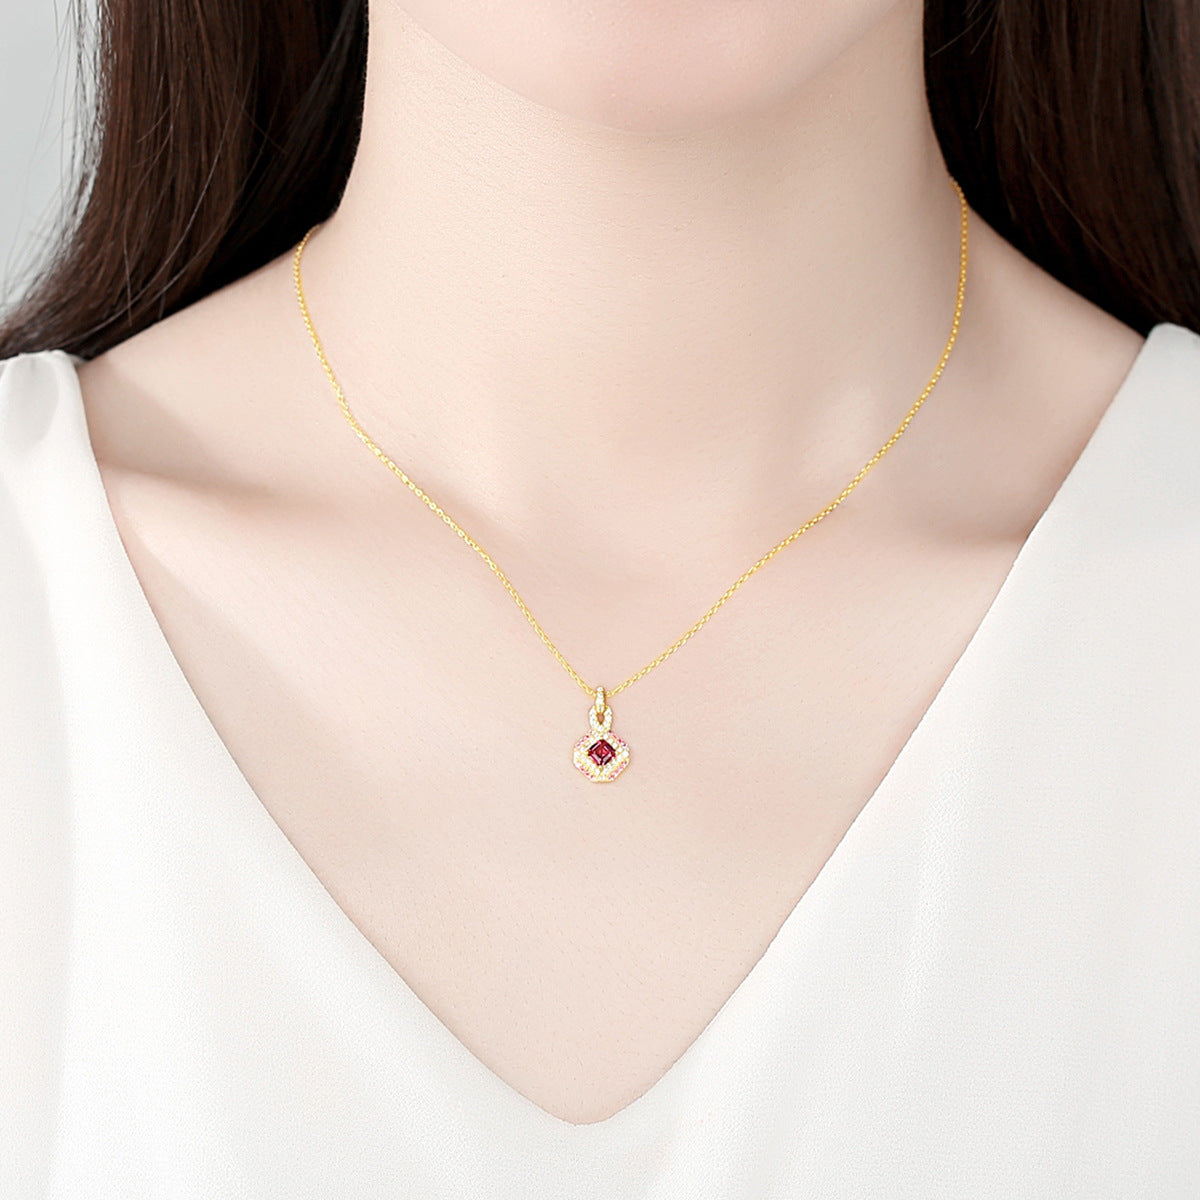 Gemstonely- Vintage and Elegant: S925 Silver Necklace with Red Gemstone Pendant for Women Simulated Ruby in Light Luxury Style